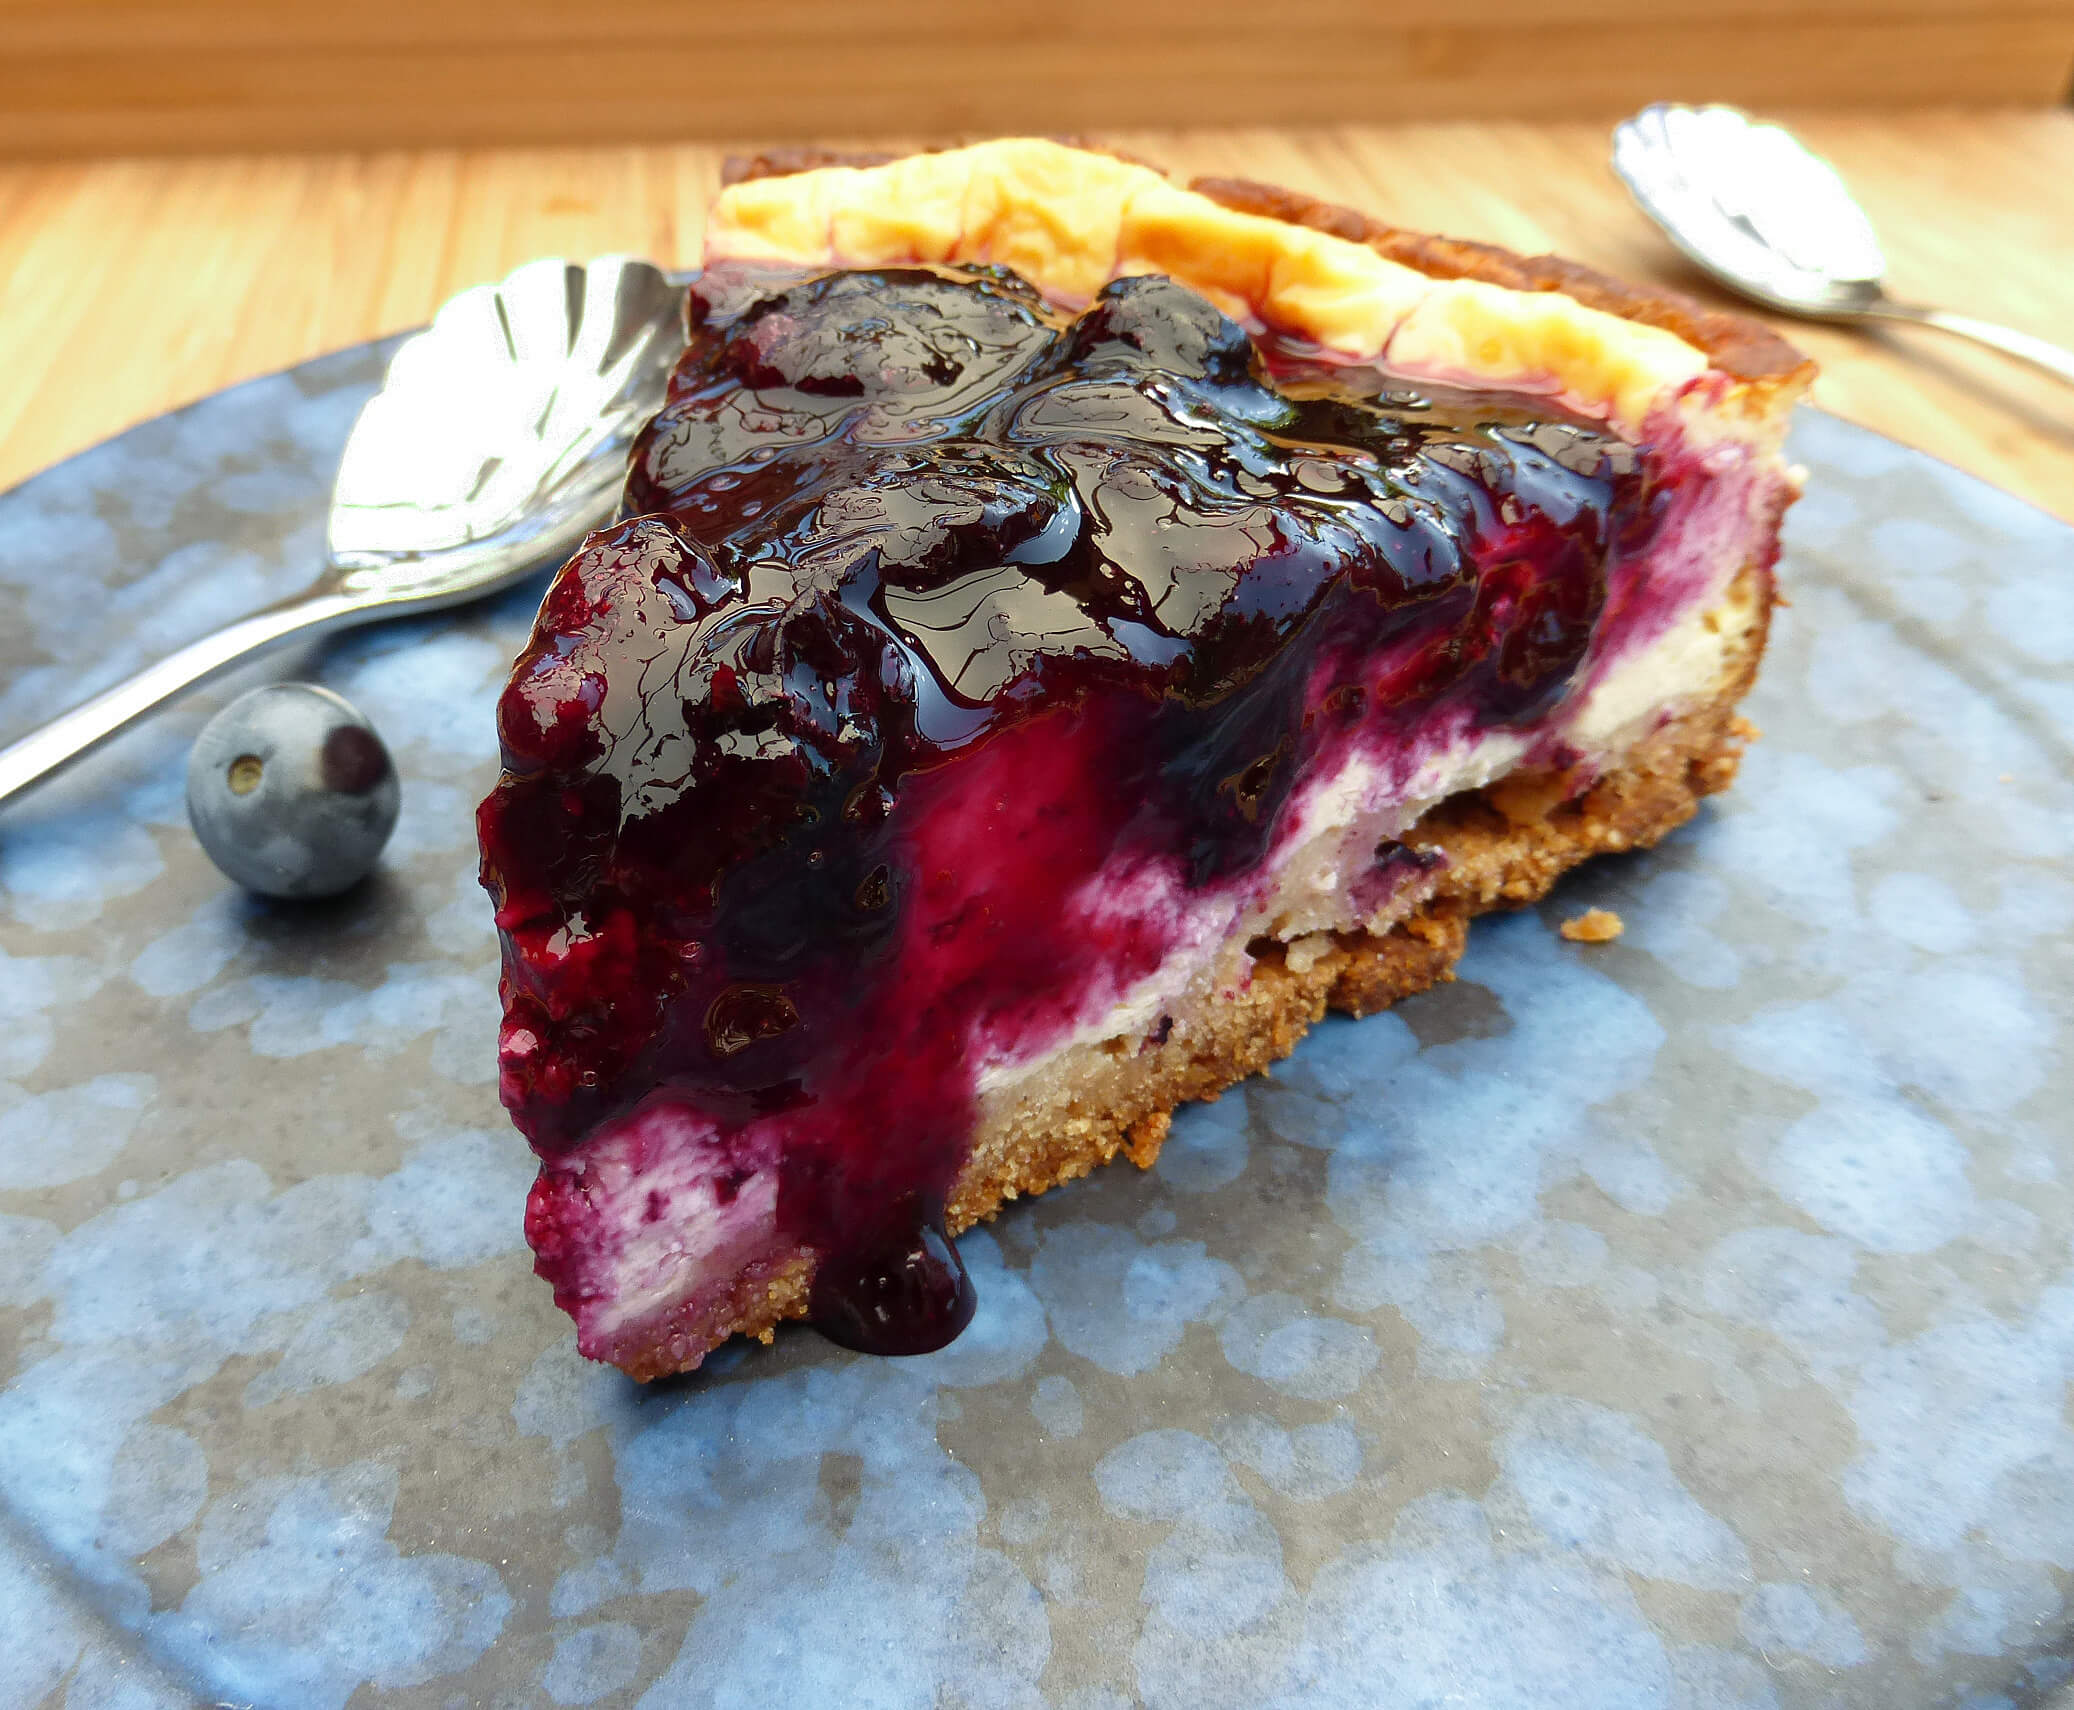 https://www.theculinaryjumble.com/2017/08/06/baked-greek-yoghurt-cheesecake-with-a-fresh-blueberry-compote-no-refined-sugar-and-gluten-free/